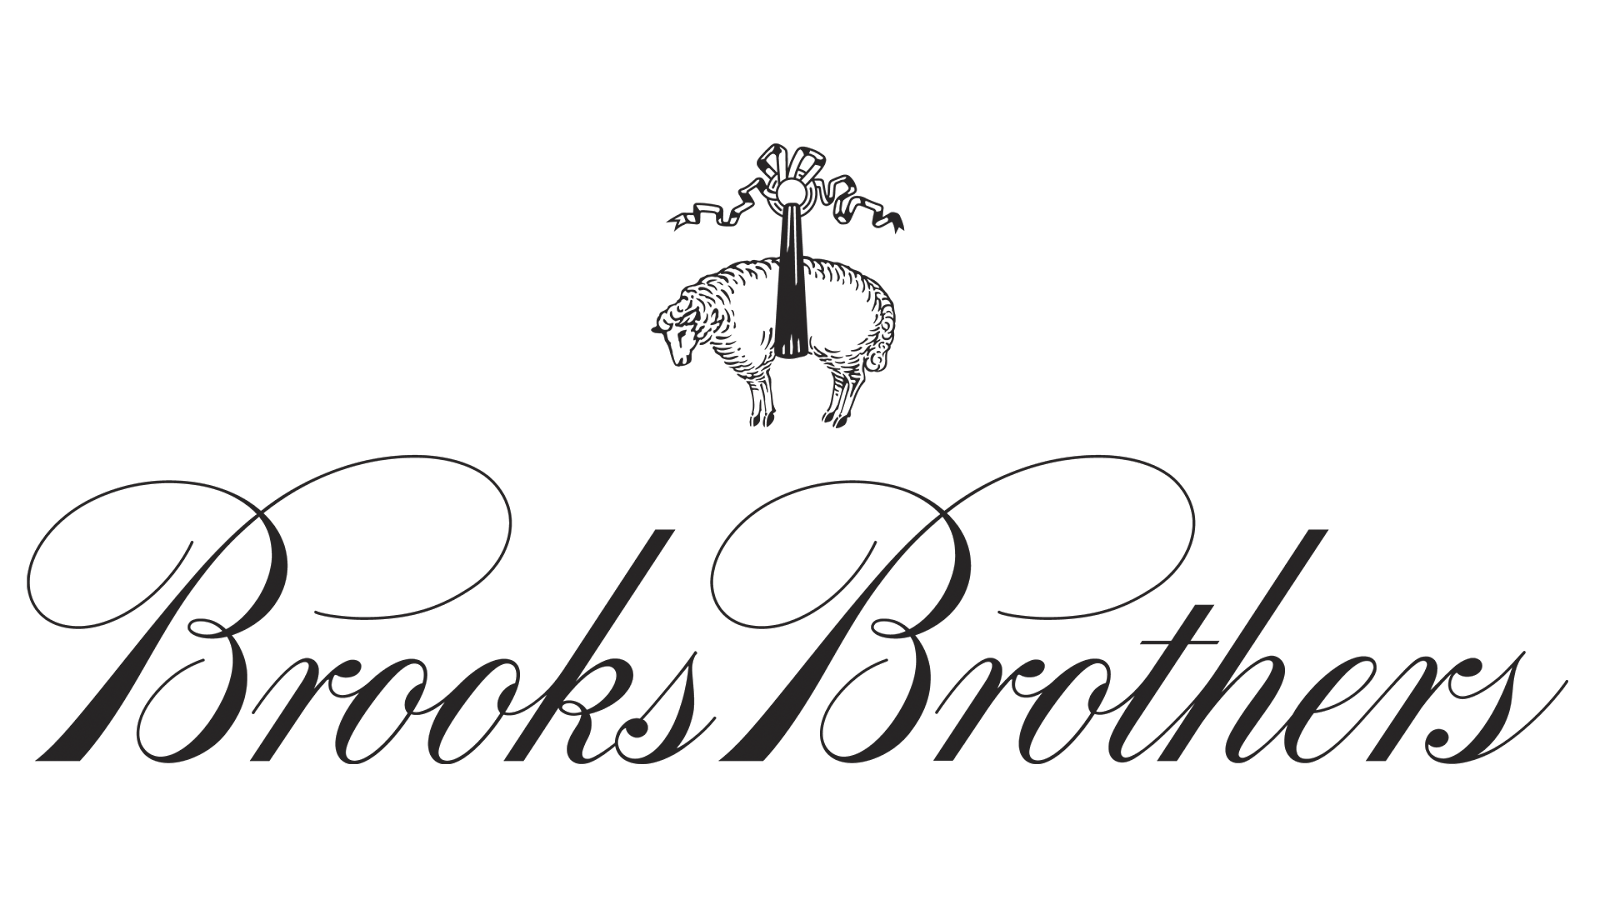 The logo for Brooks Brothers